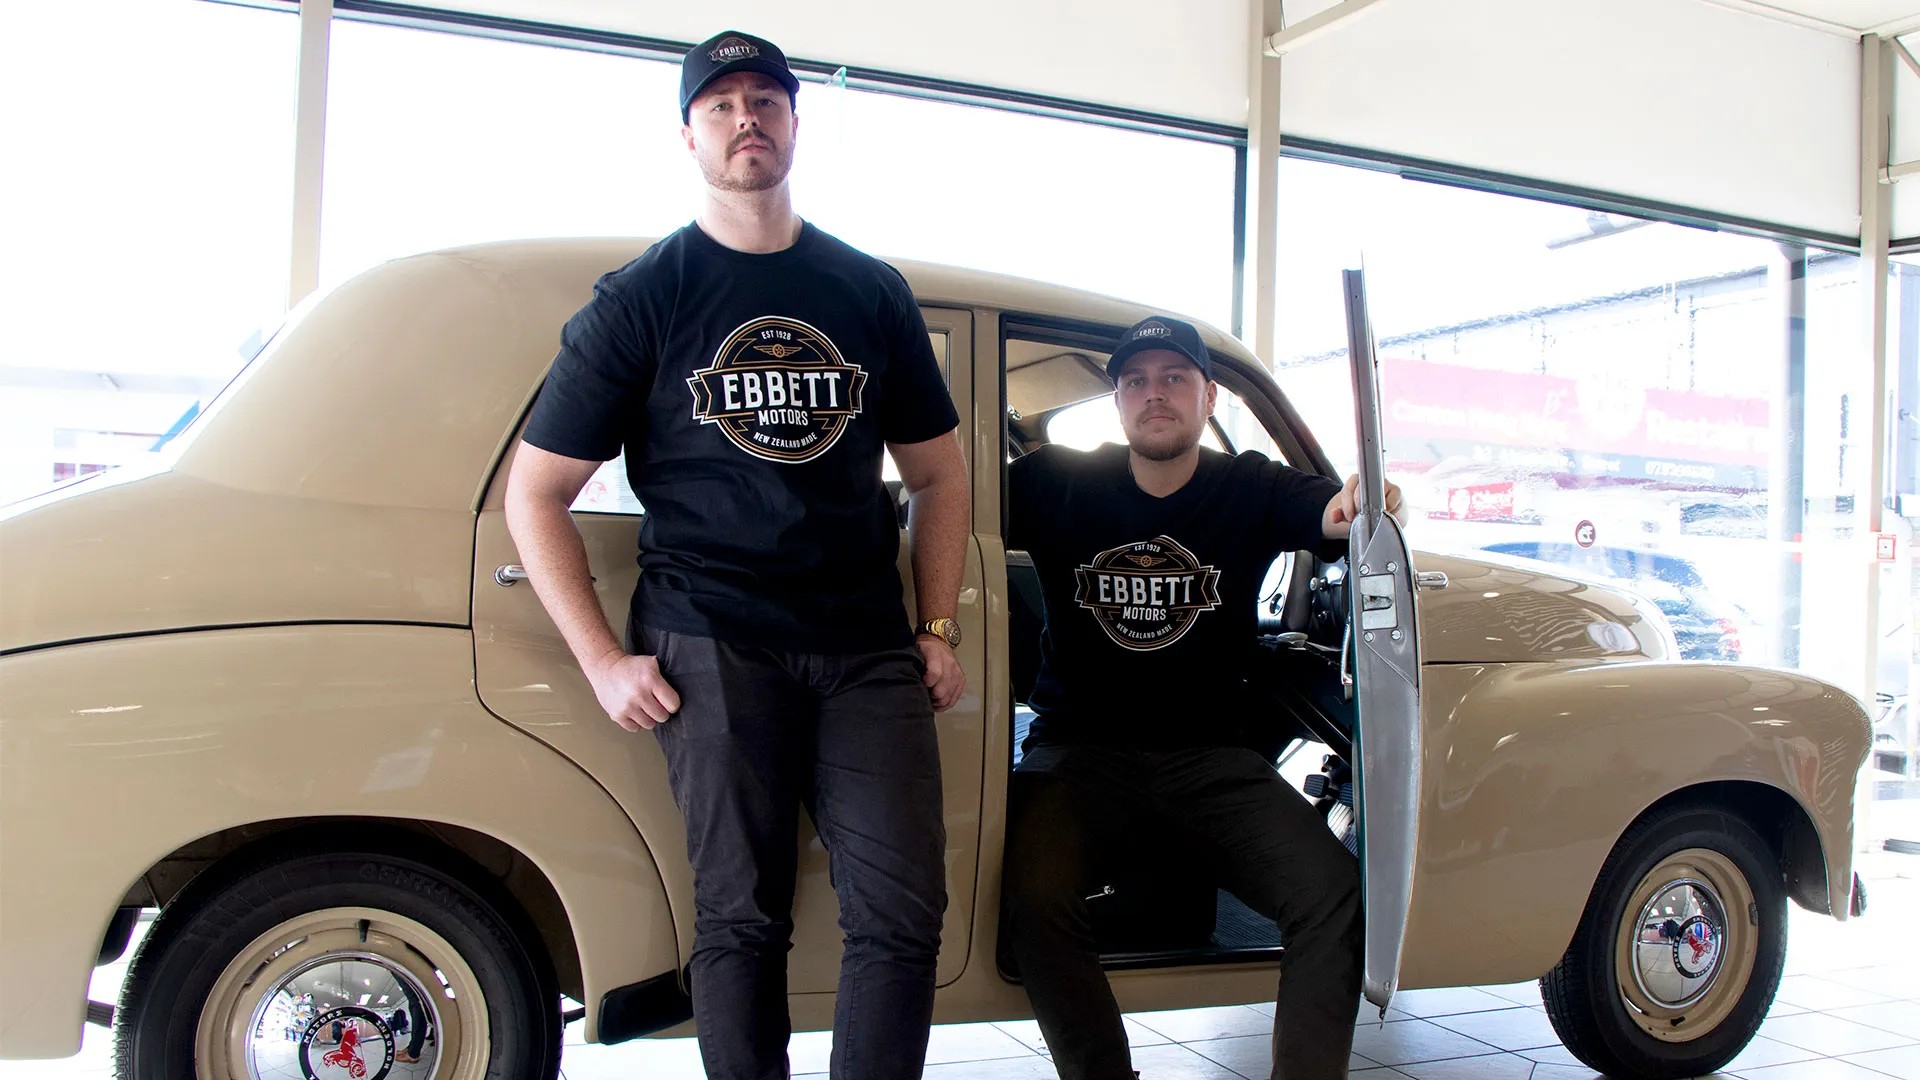 Ebbett Vintage Merch - two guys in front of vintage car